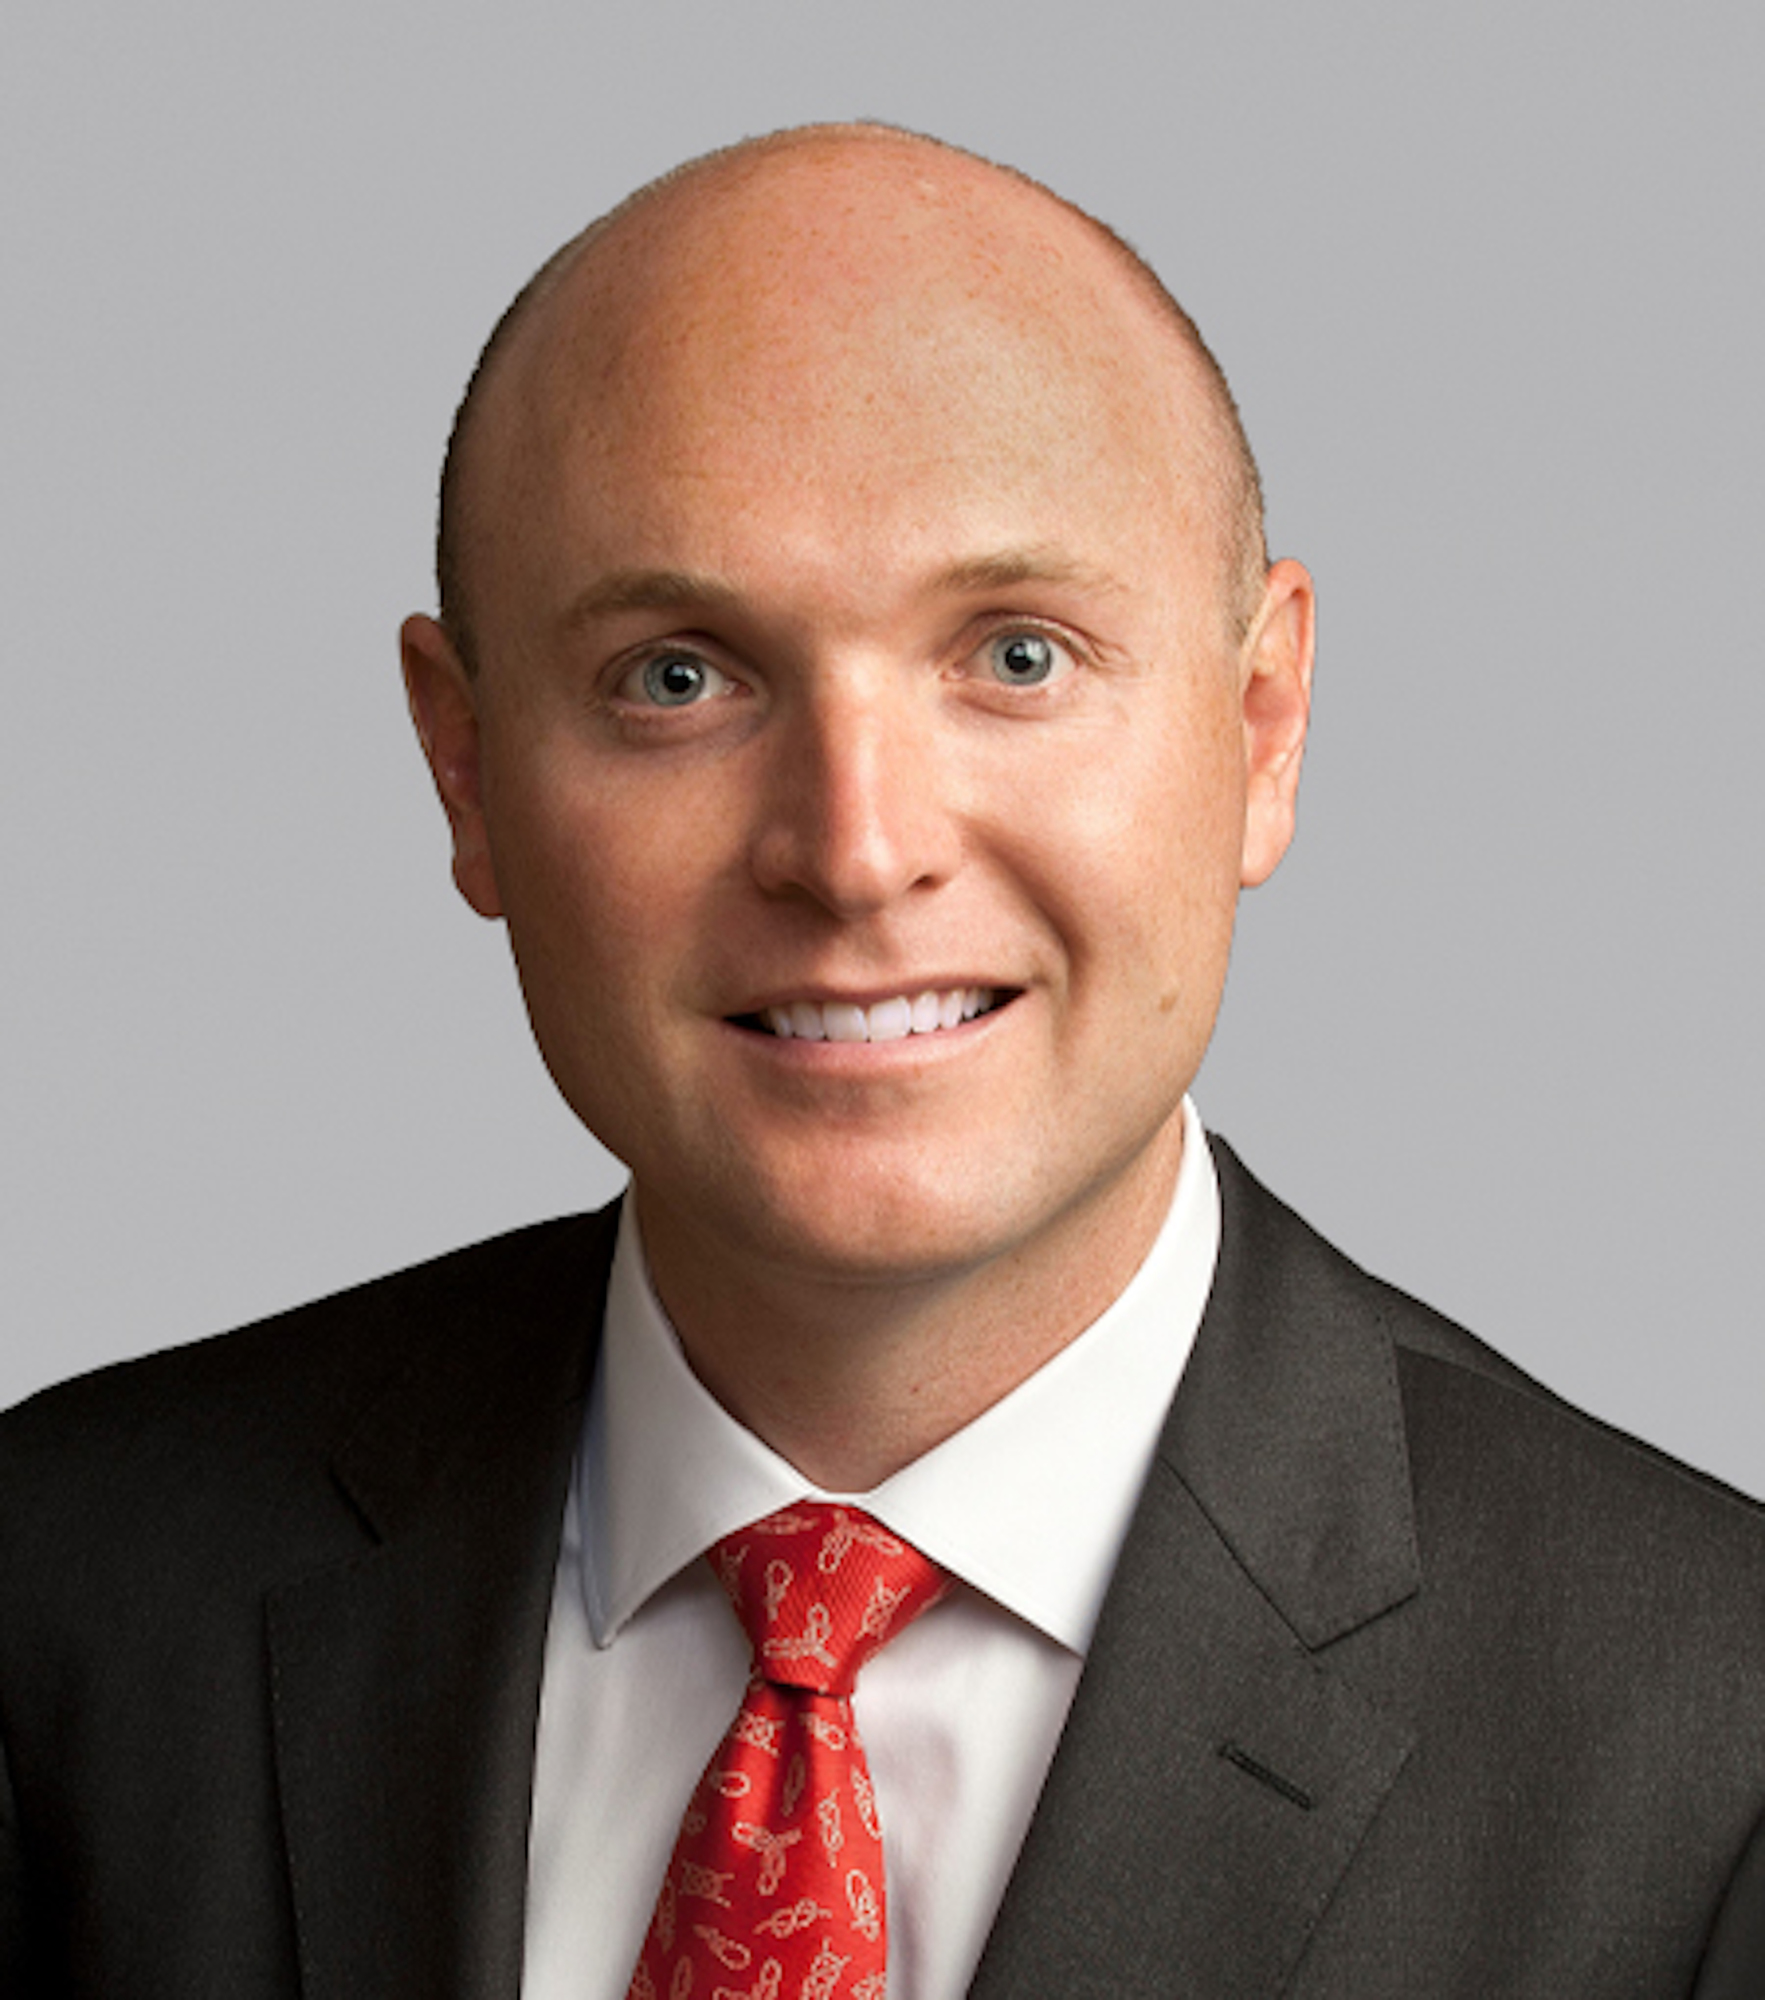 COURTESY PHOTO -- Jay Jordan joined Cushman & wakefield's senior housing team after working at Key Bank in Ohio and Florida.